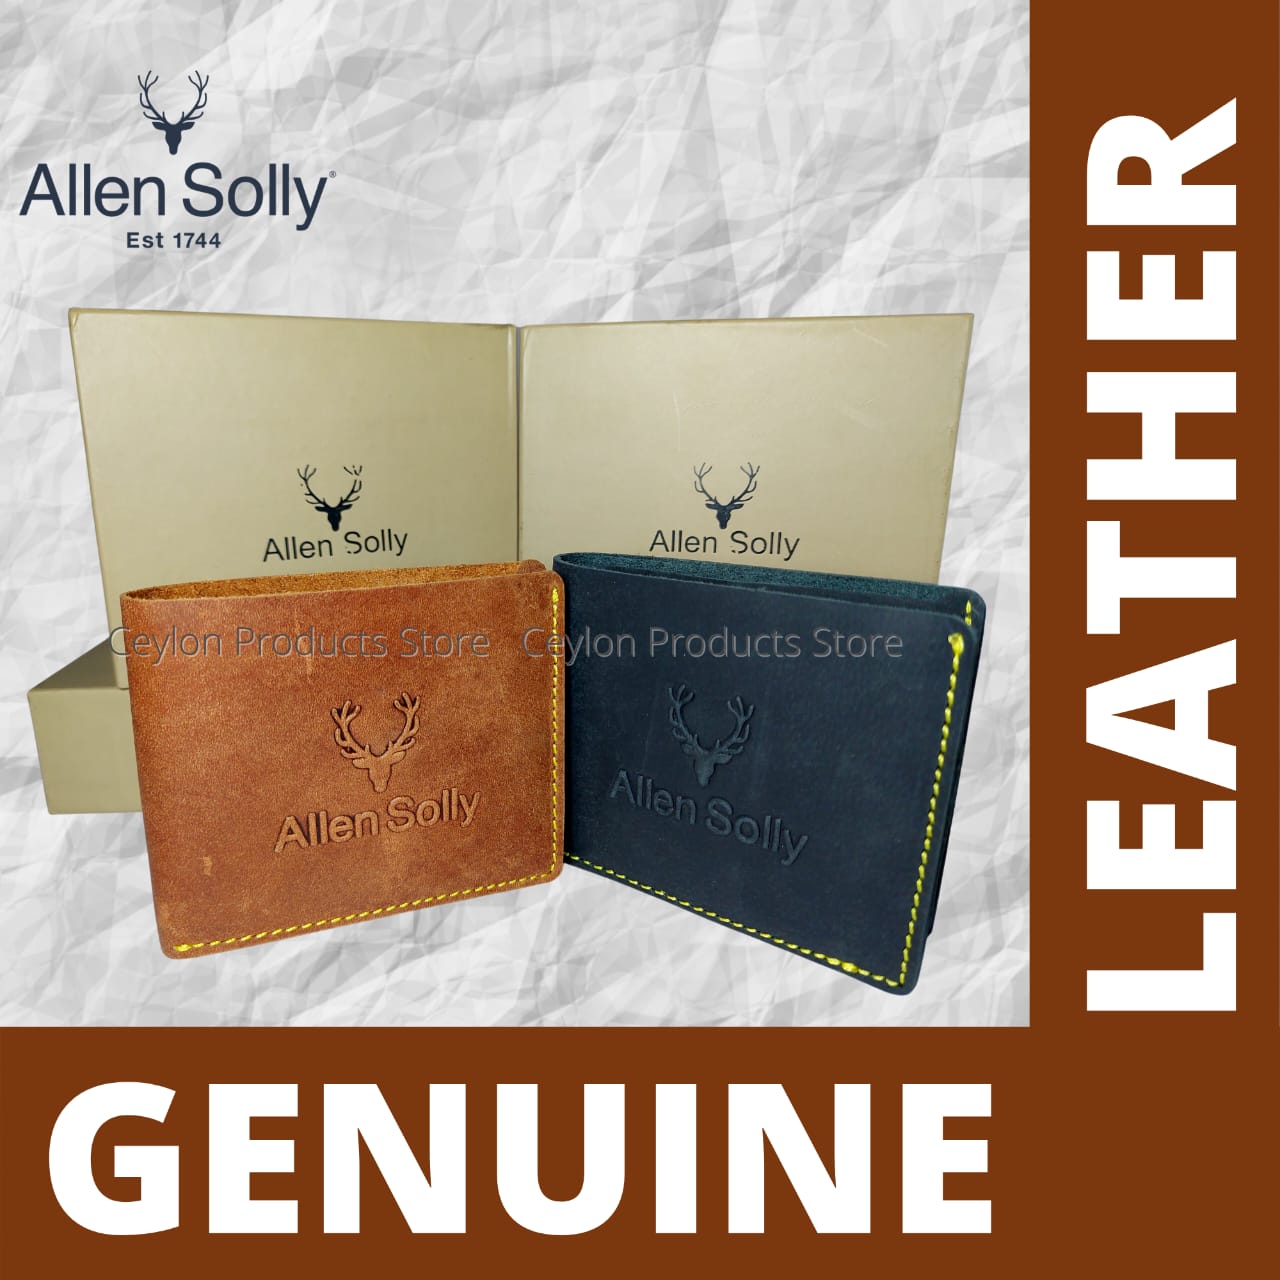 Buy Allen Solly Bi Fold Slim & Light Weight Leather Men's Stylish Casual  Wallet Purse with Card Holder Compartment